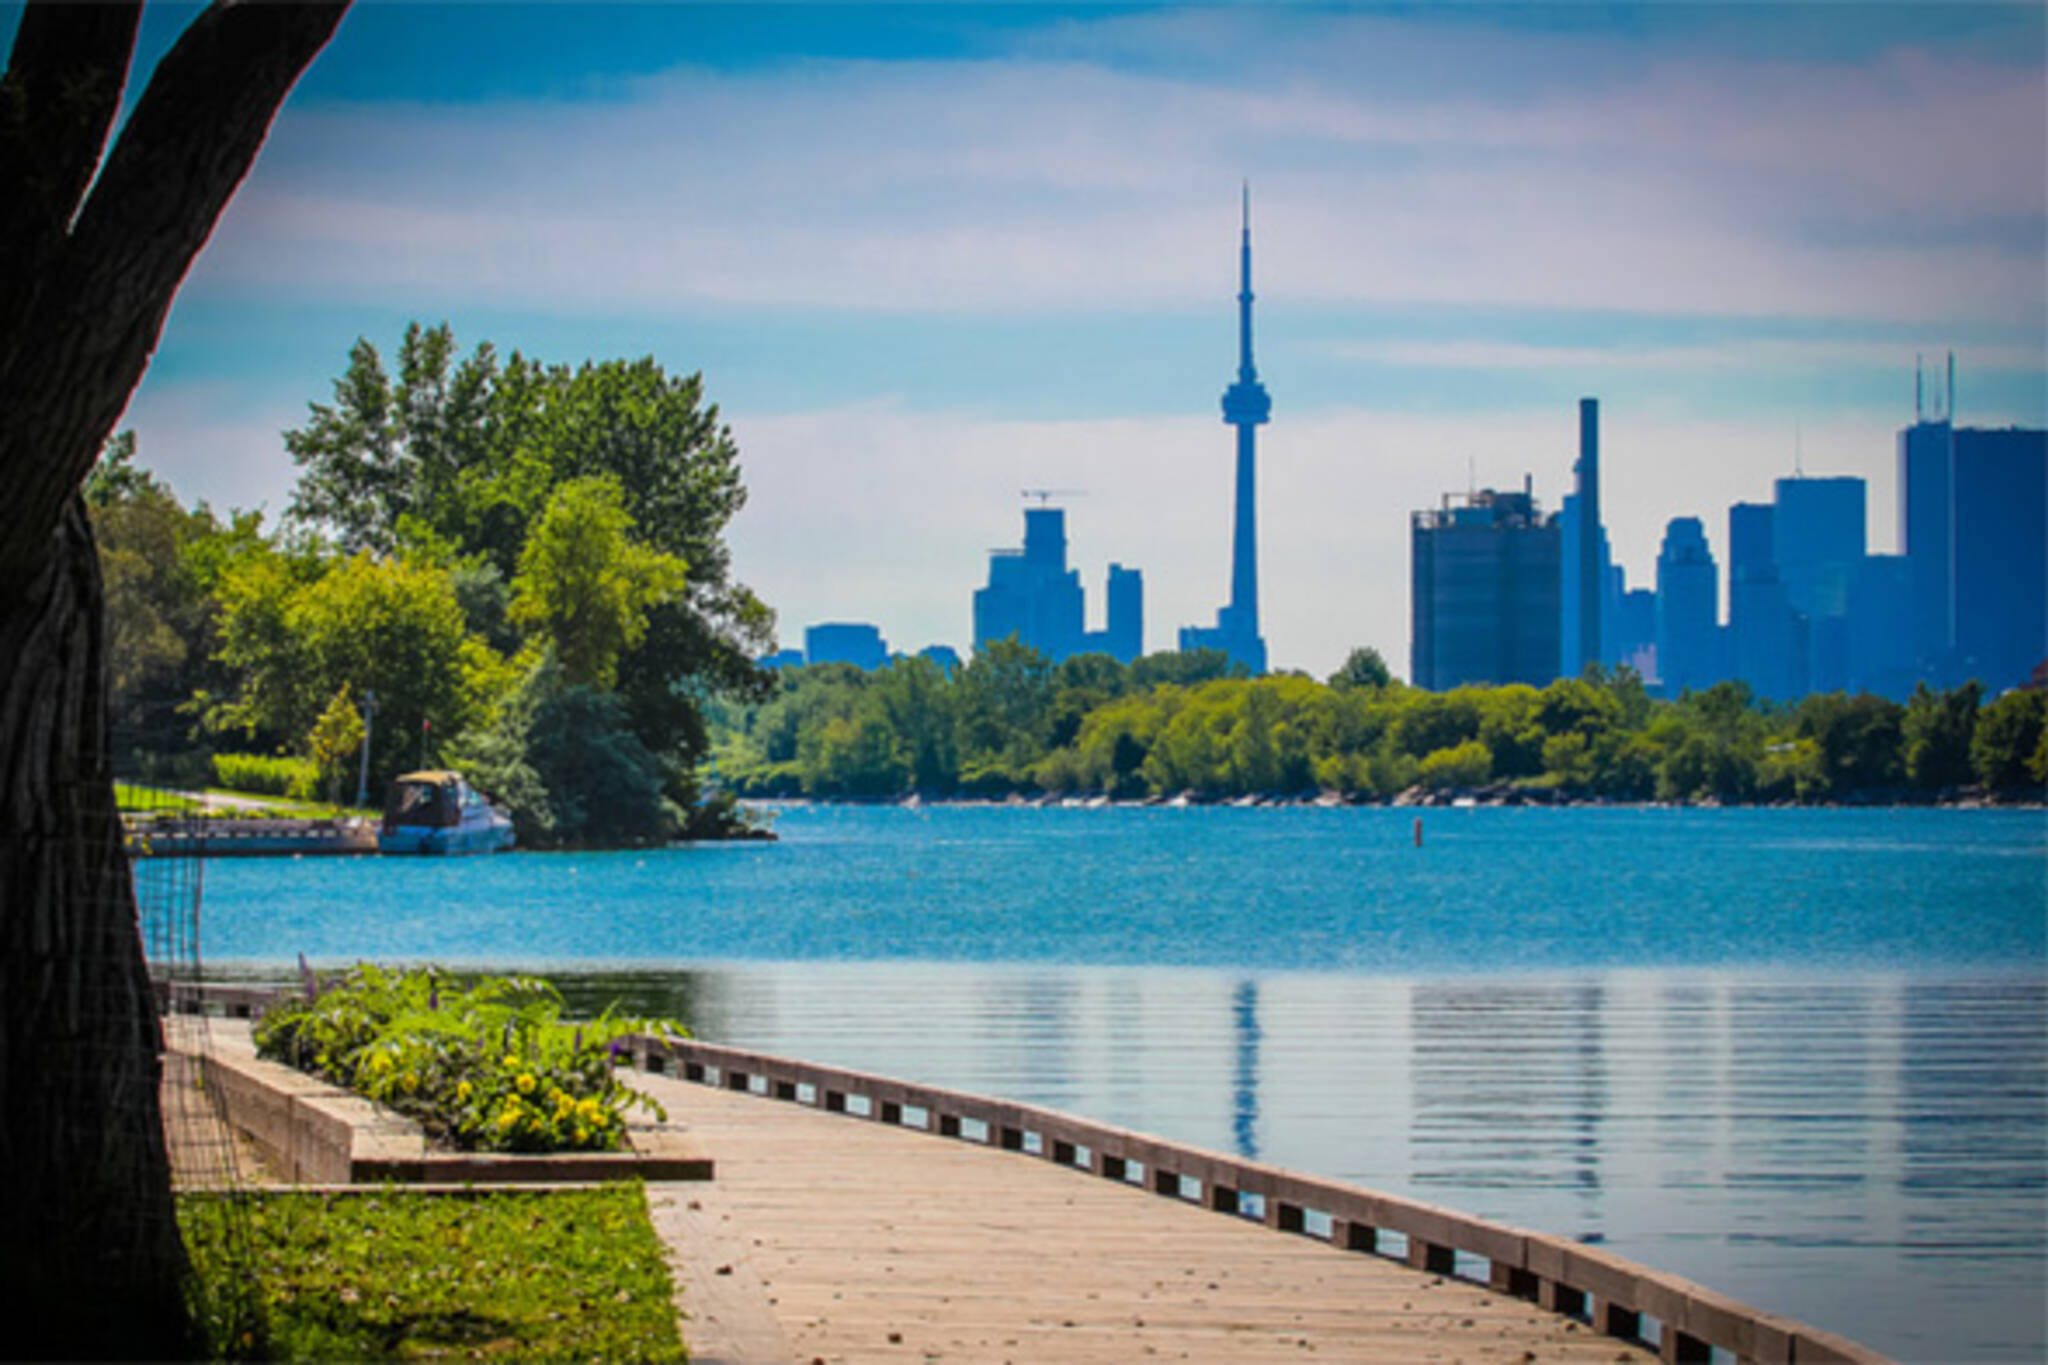 It's going to be a hot and humid weekend in Toronto